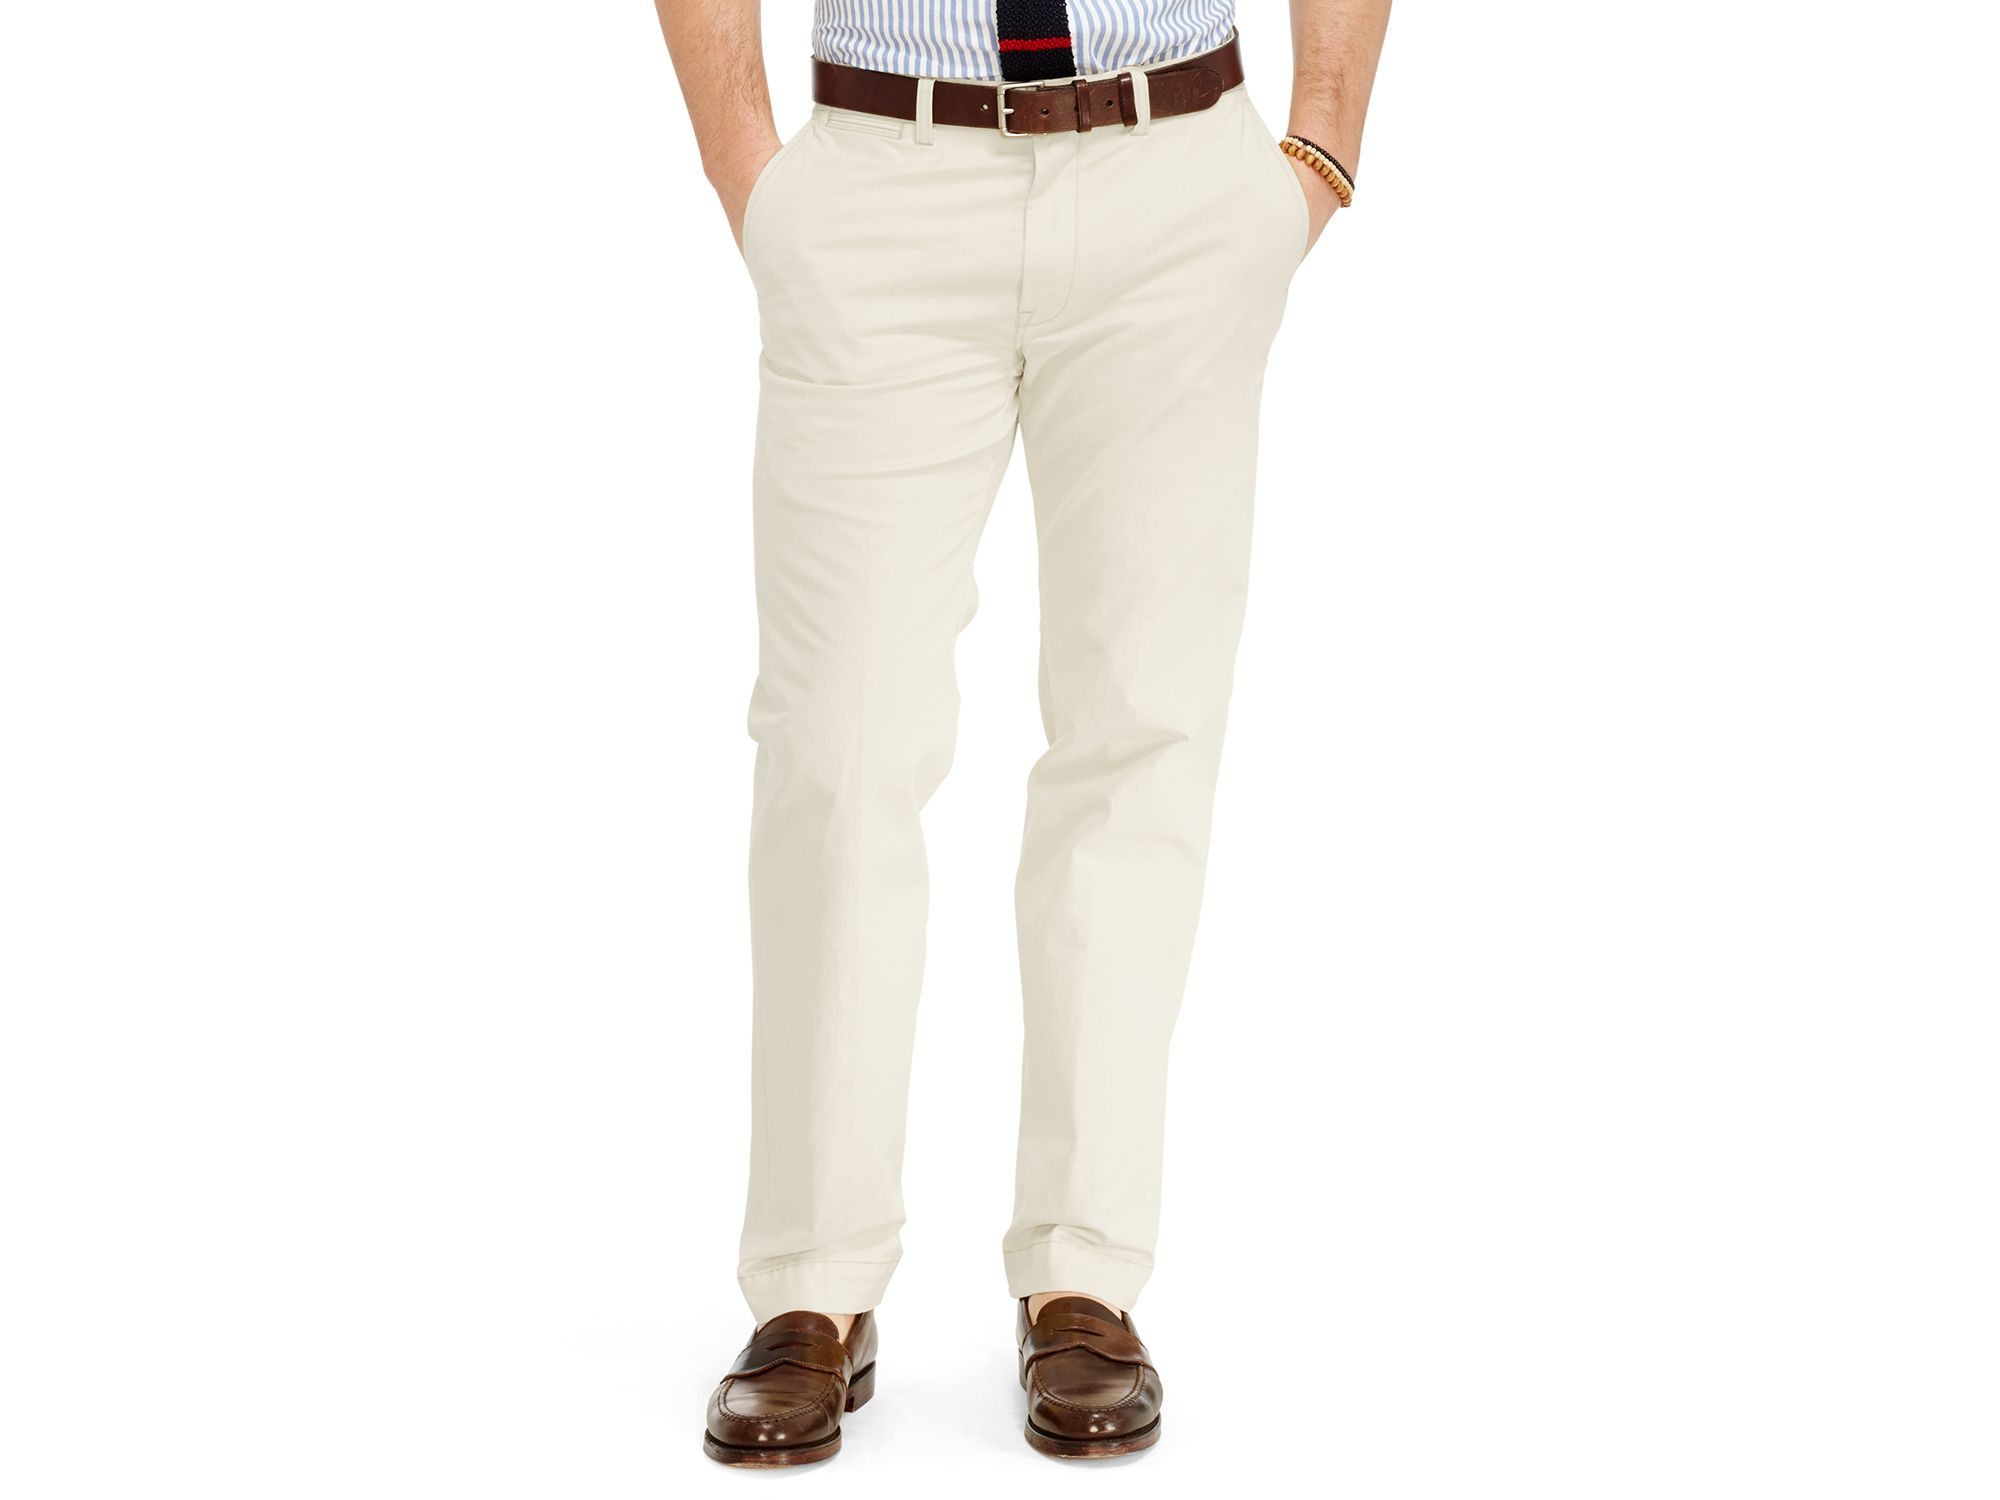 Polo ralph lauren Classic Fit Lightweight Chino Pants in Beige for Men ...